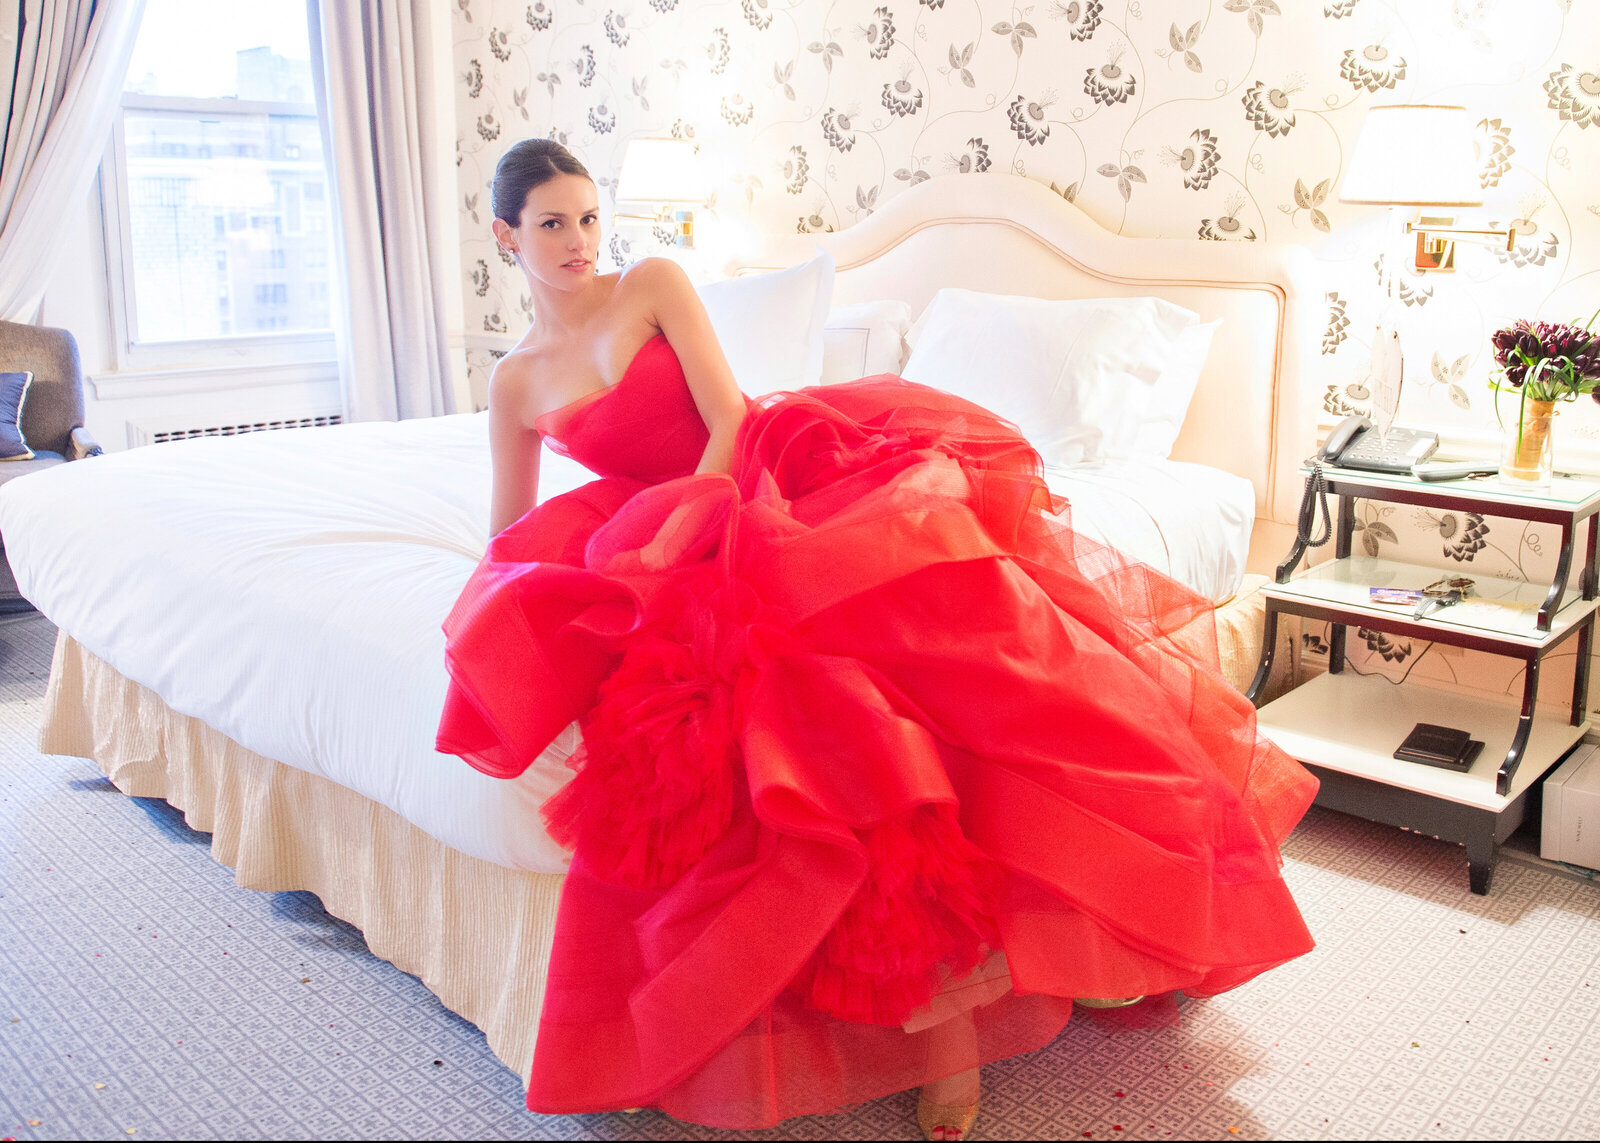 Woman in a red ballgown reclining on bed